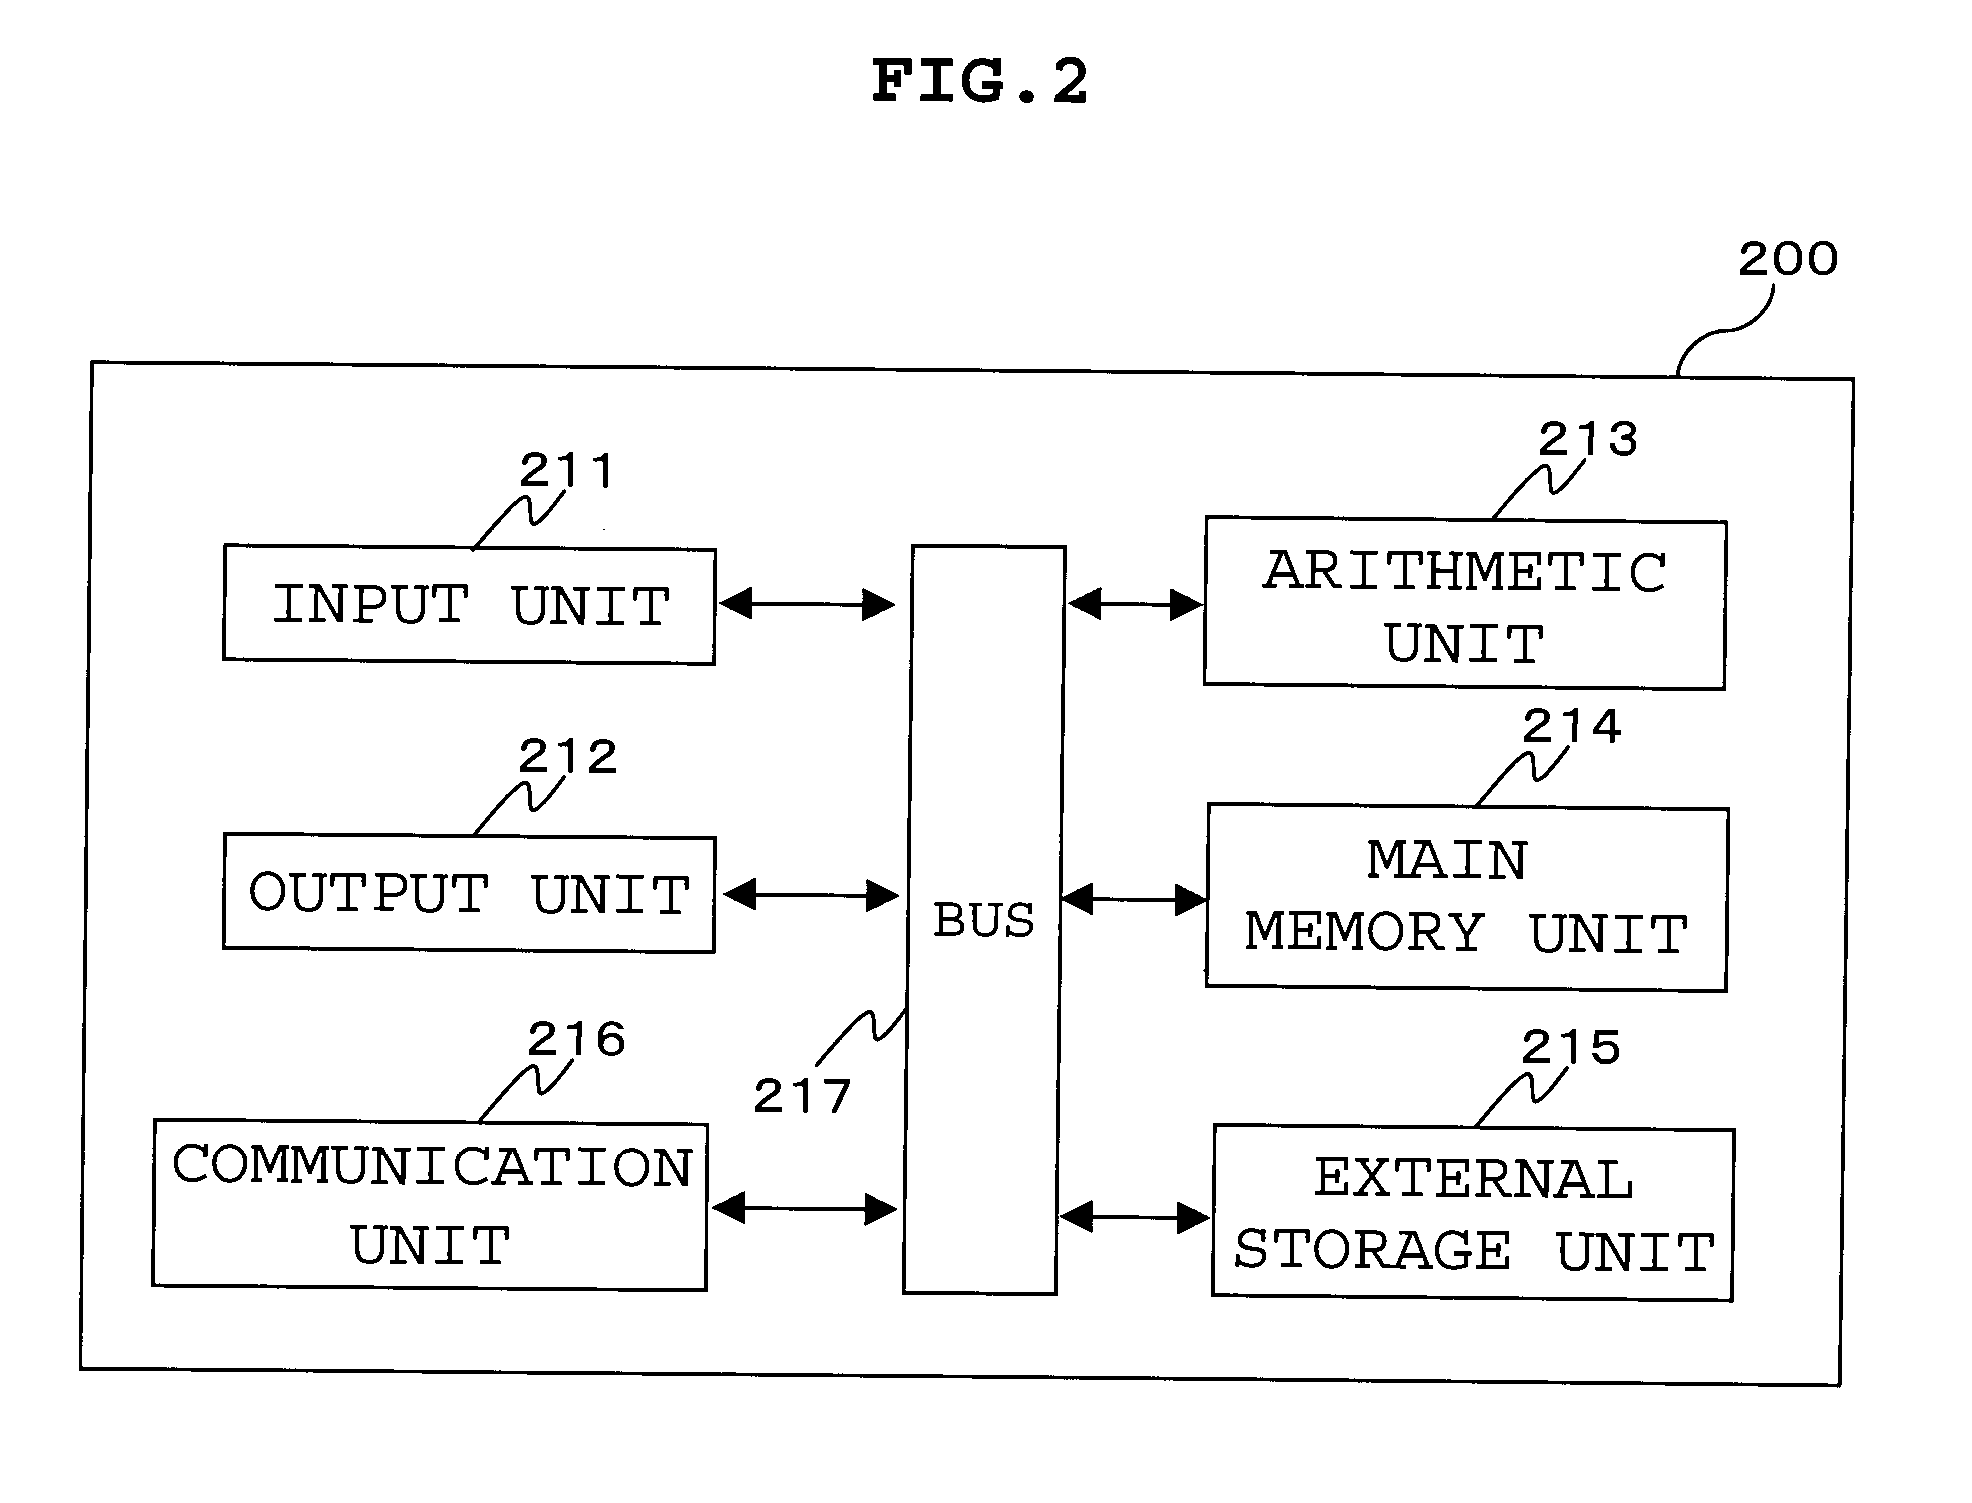 Apparatus and method for supporting cause analysis